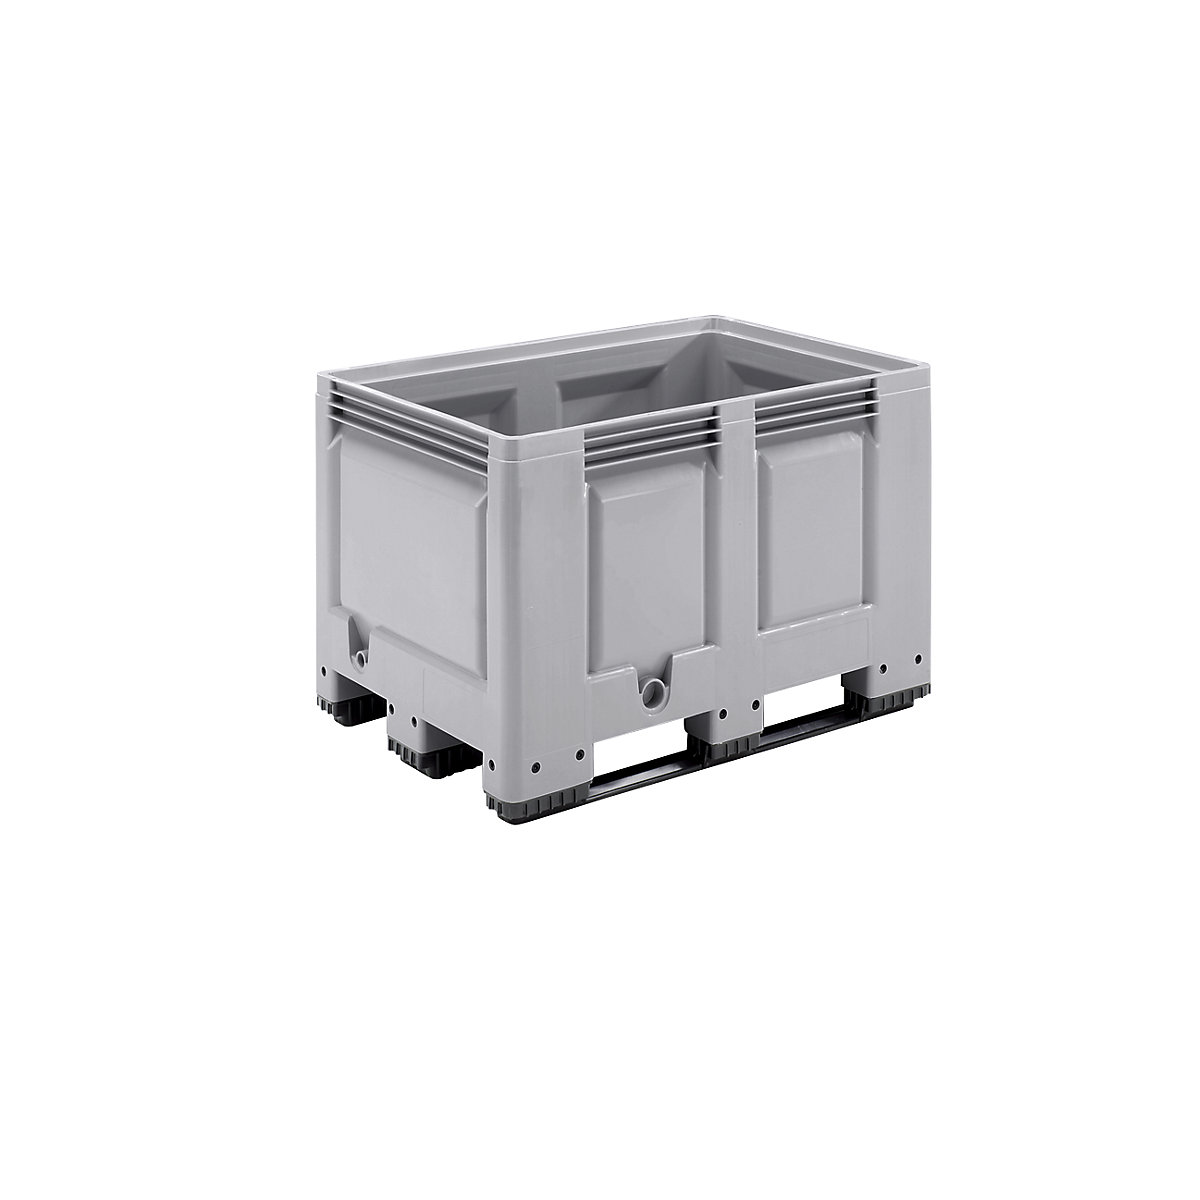 Pallet box, standard version, capacity 535 l, model with 3 runners, 6+ items-3